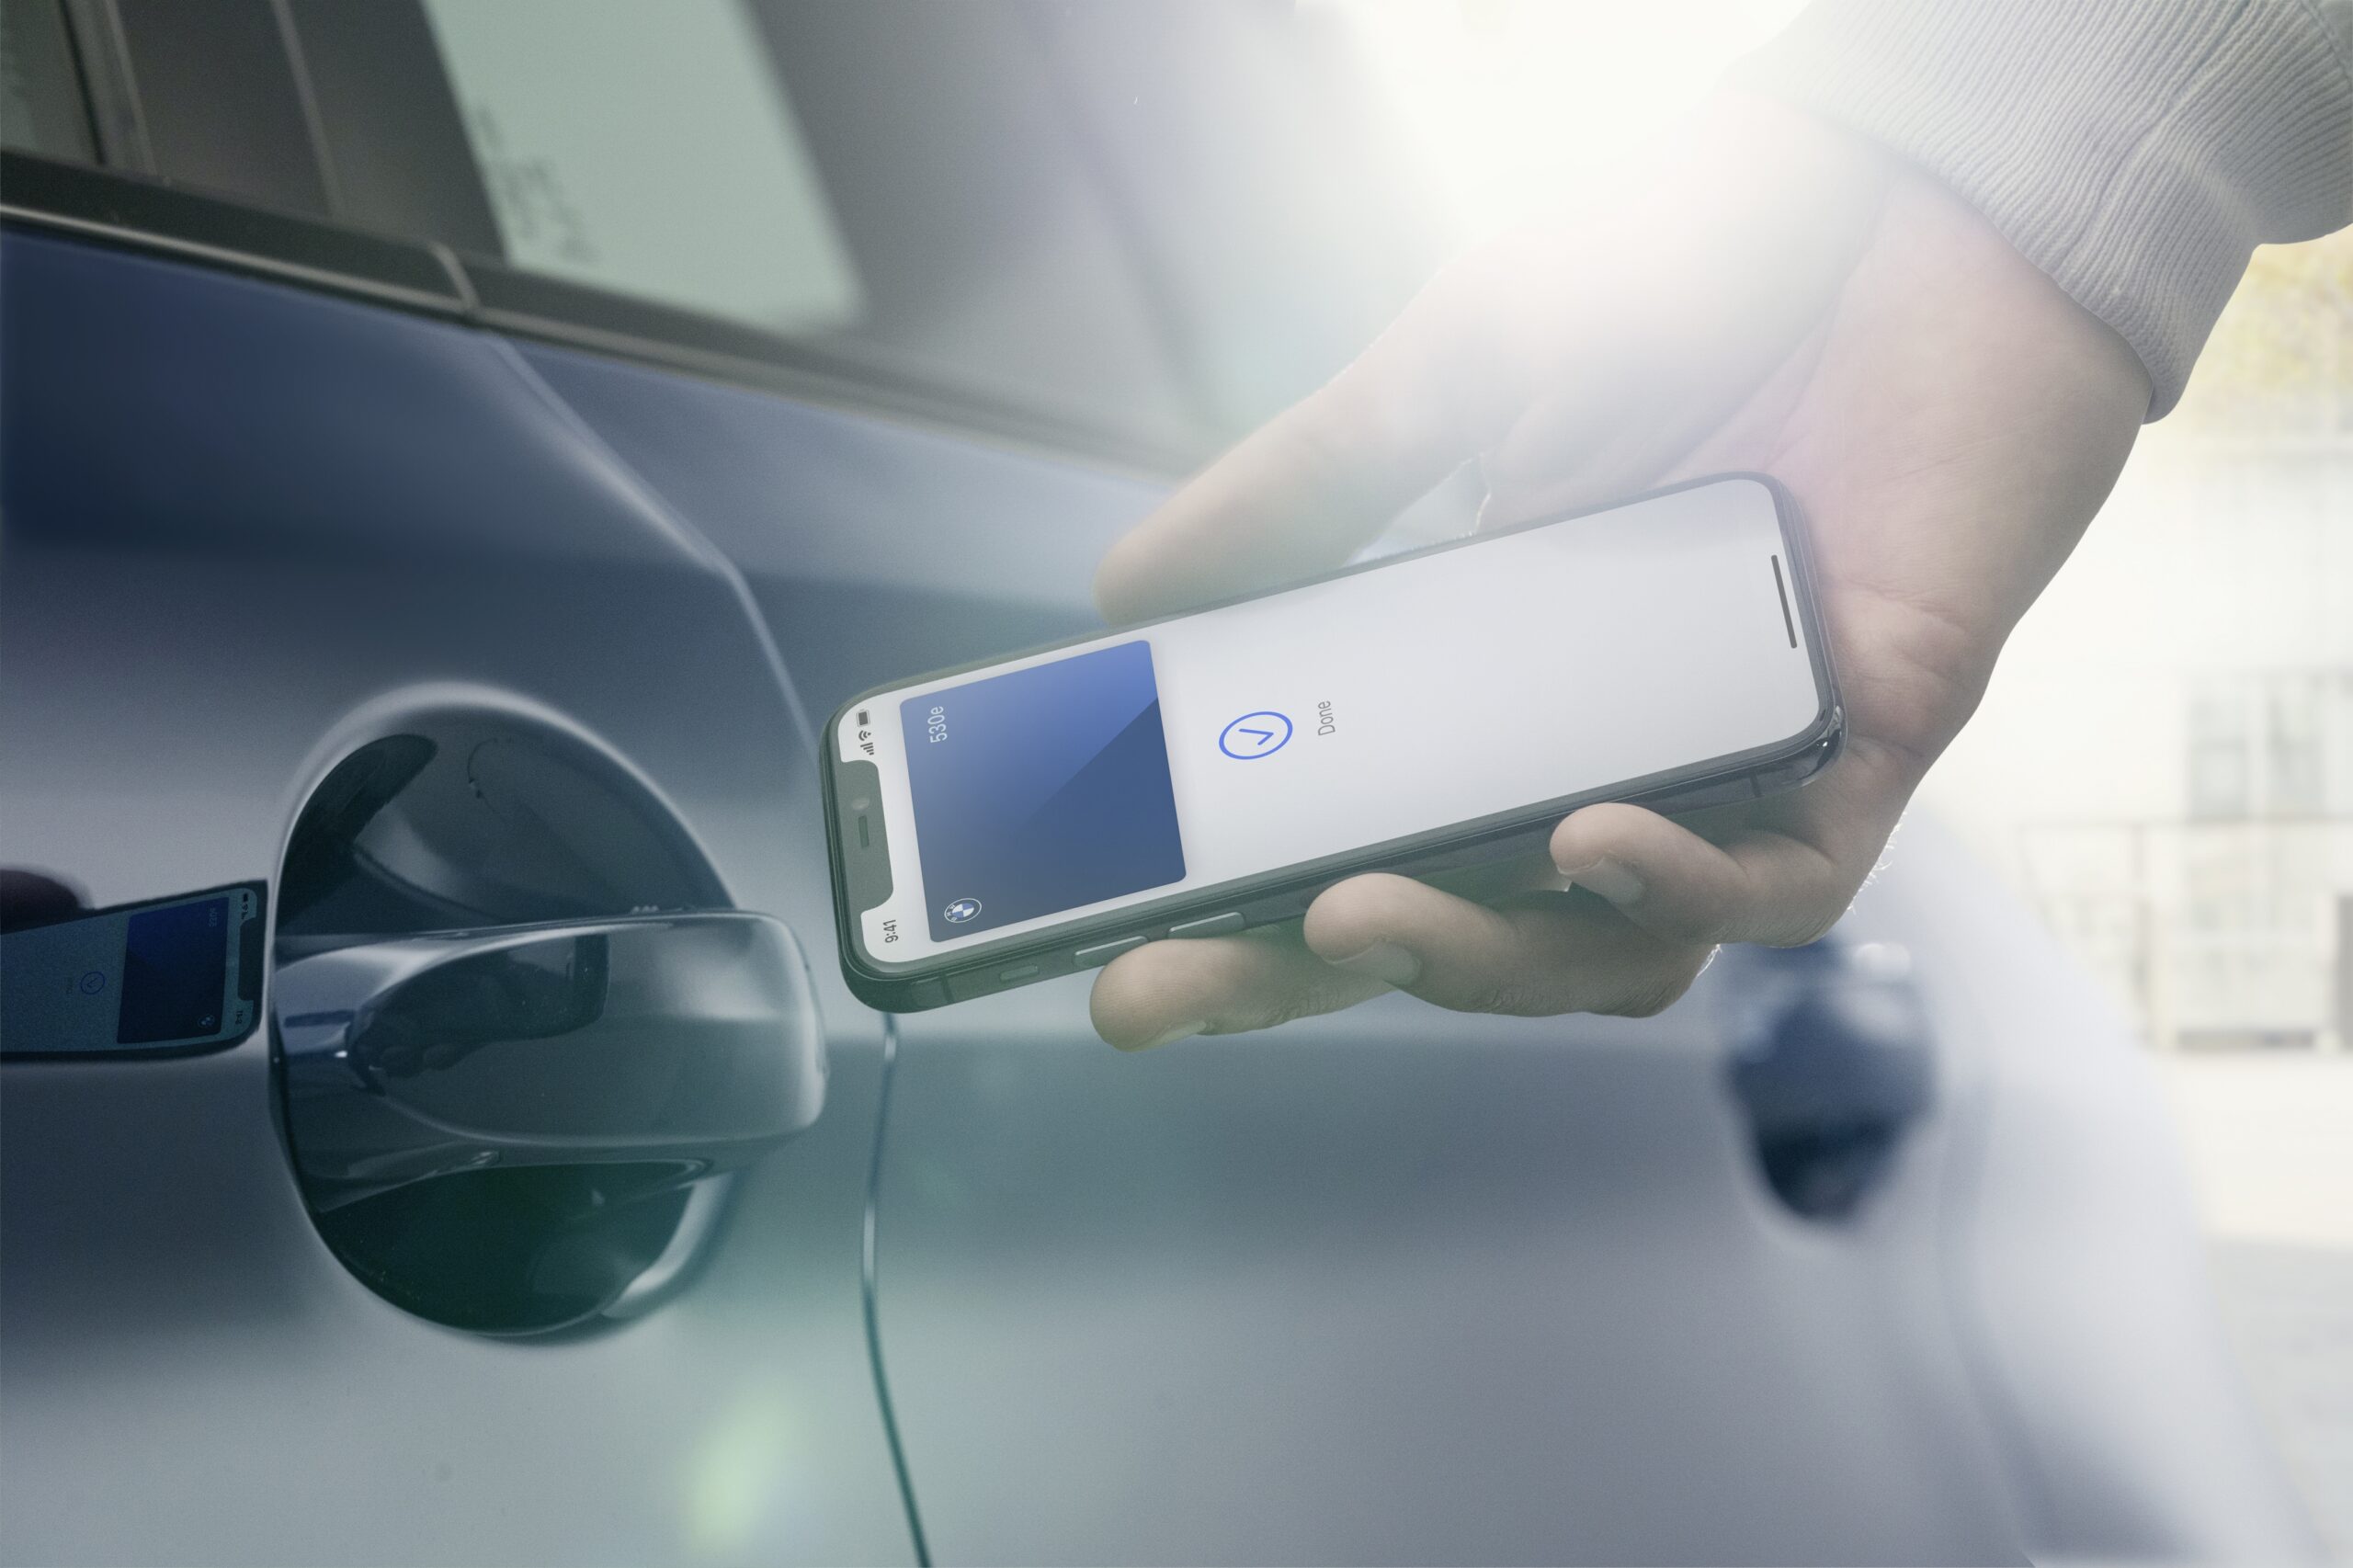 Who needs keys, when you can unlock your car with your iPhone?